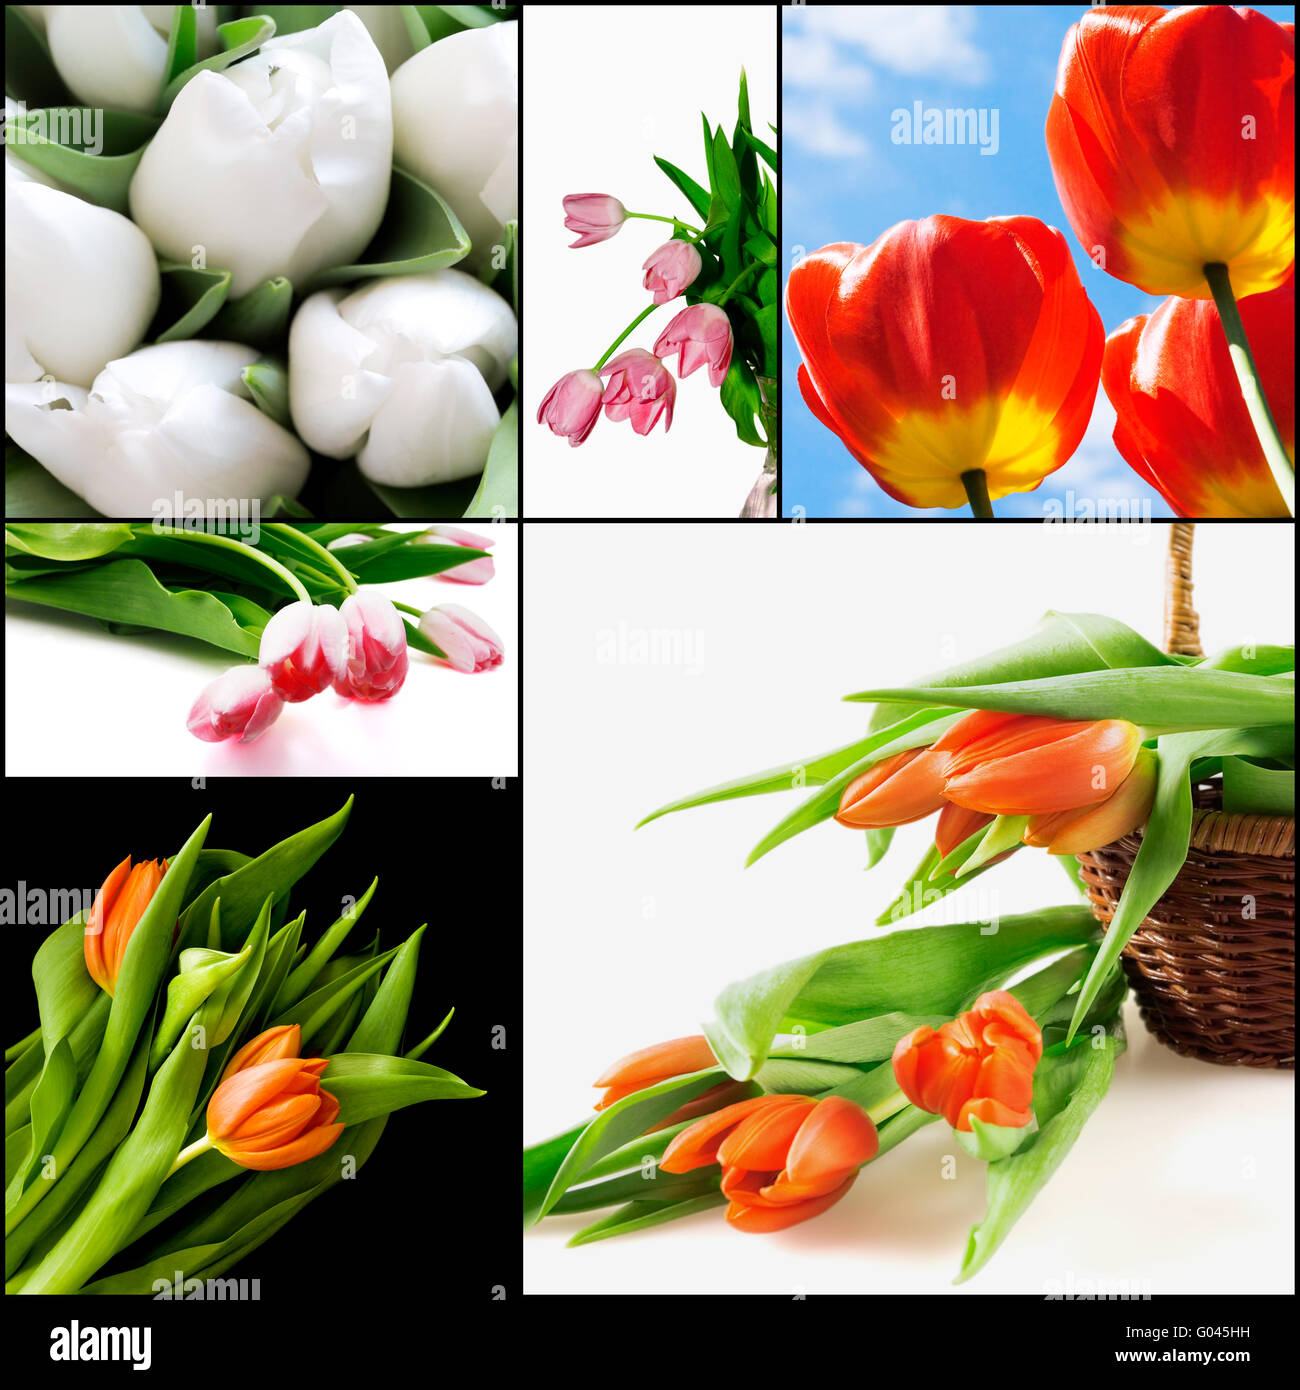 Red and white tulips as a natural background Stock Photo